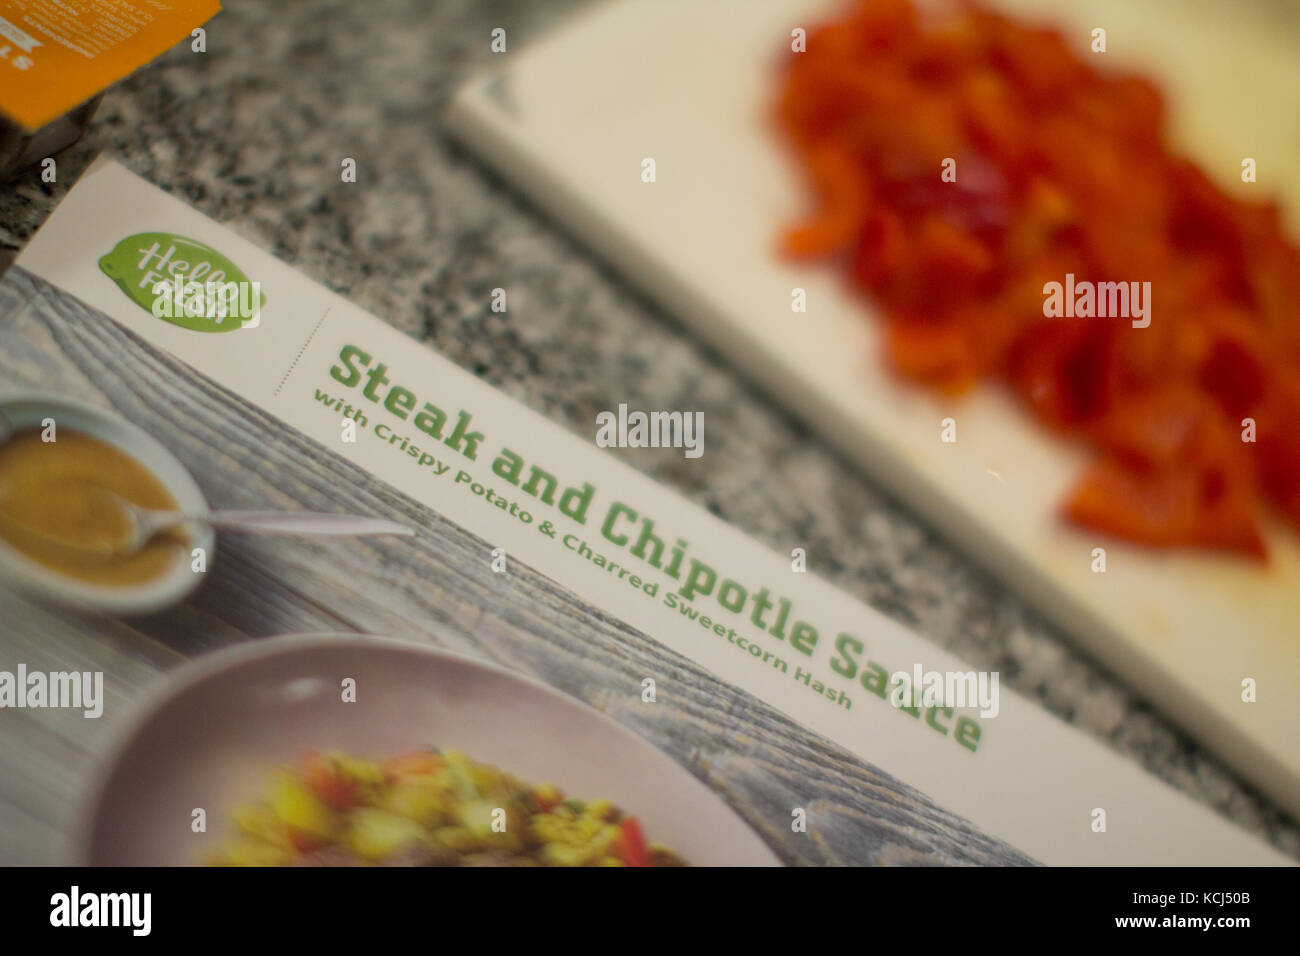 Hello Fresh, fresh food delivery service Stock Photo